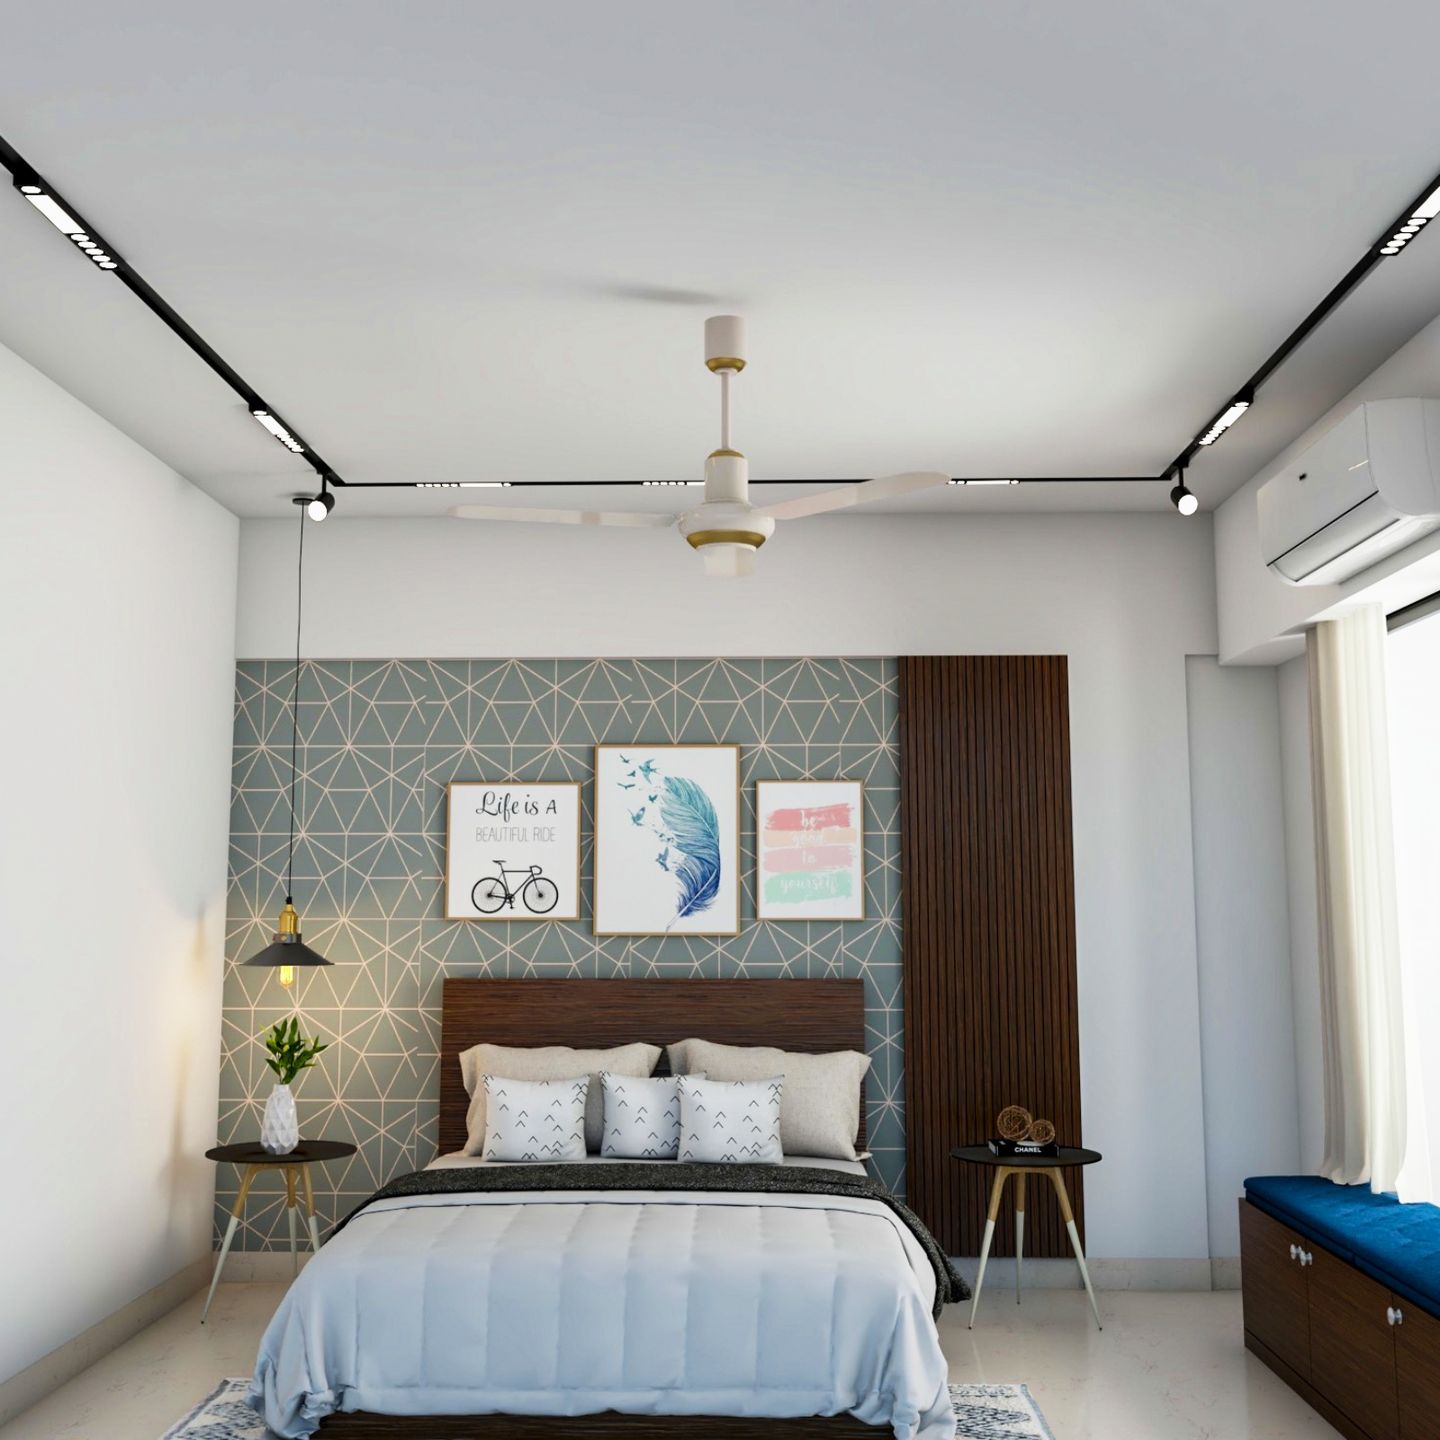 Bedroom Ceiling Design With Console Track Lights - Livspace